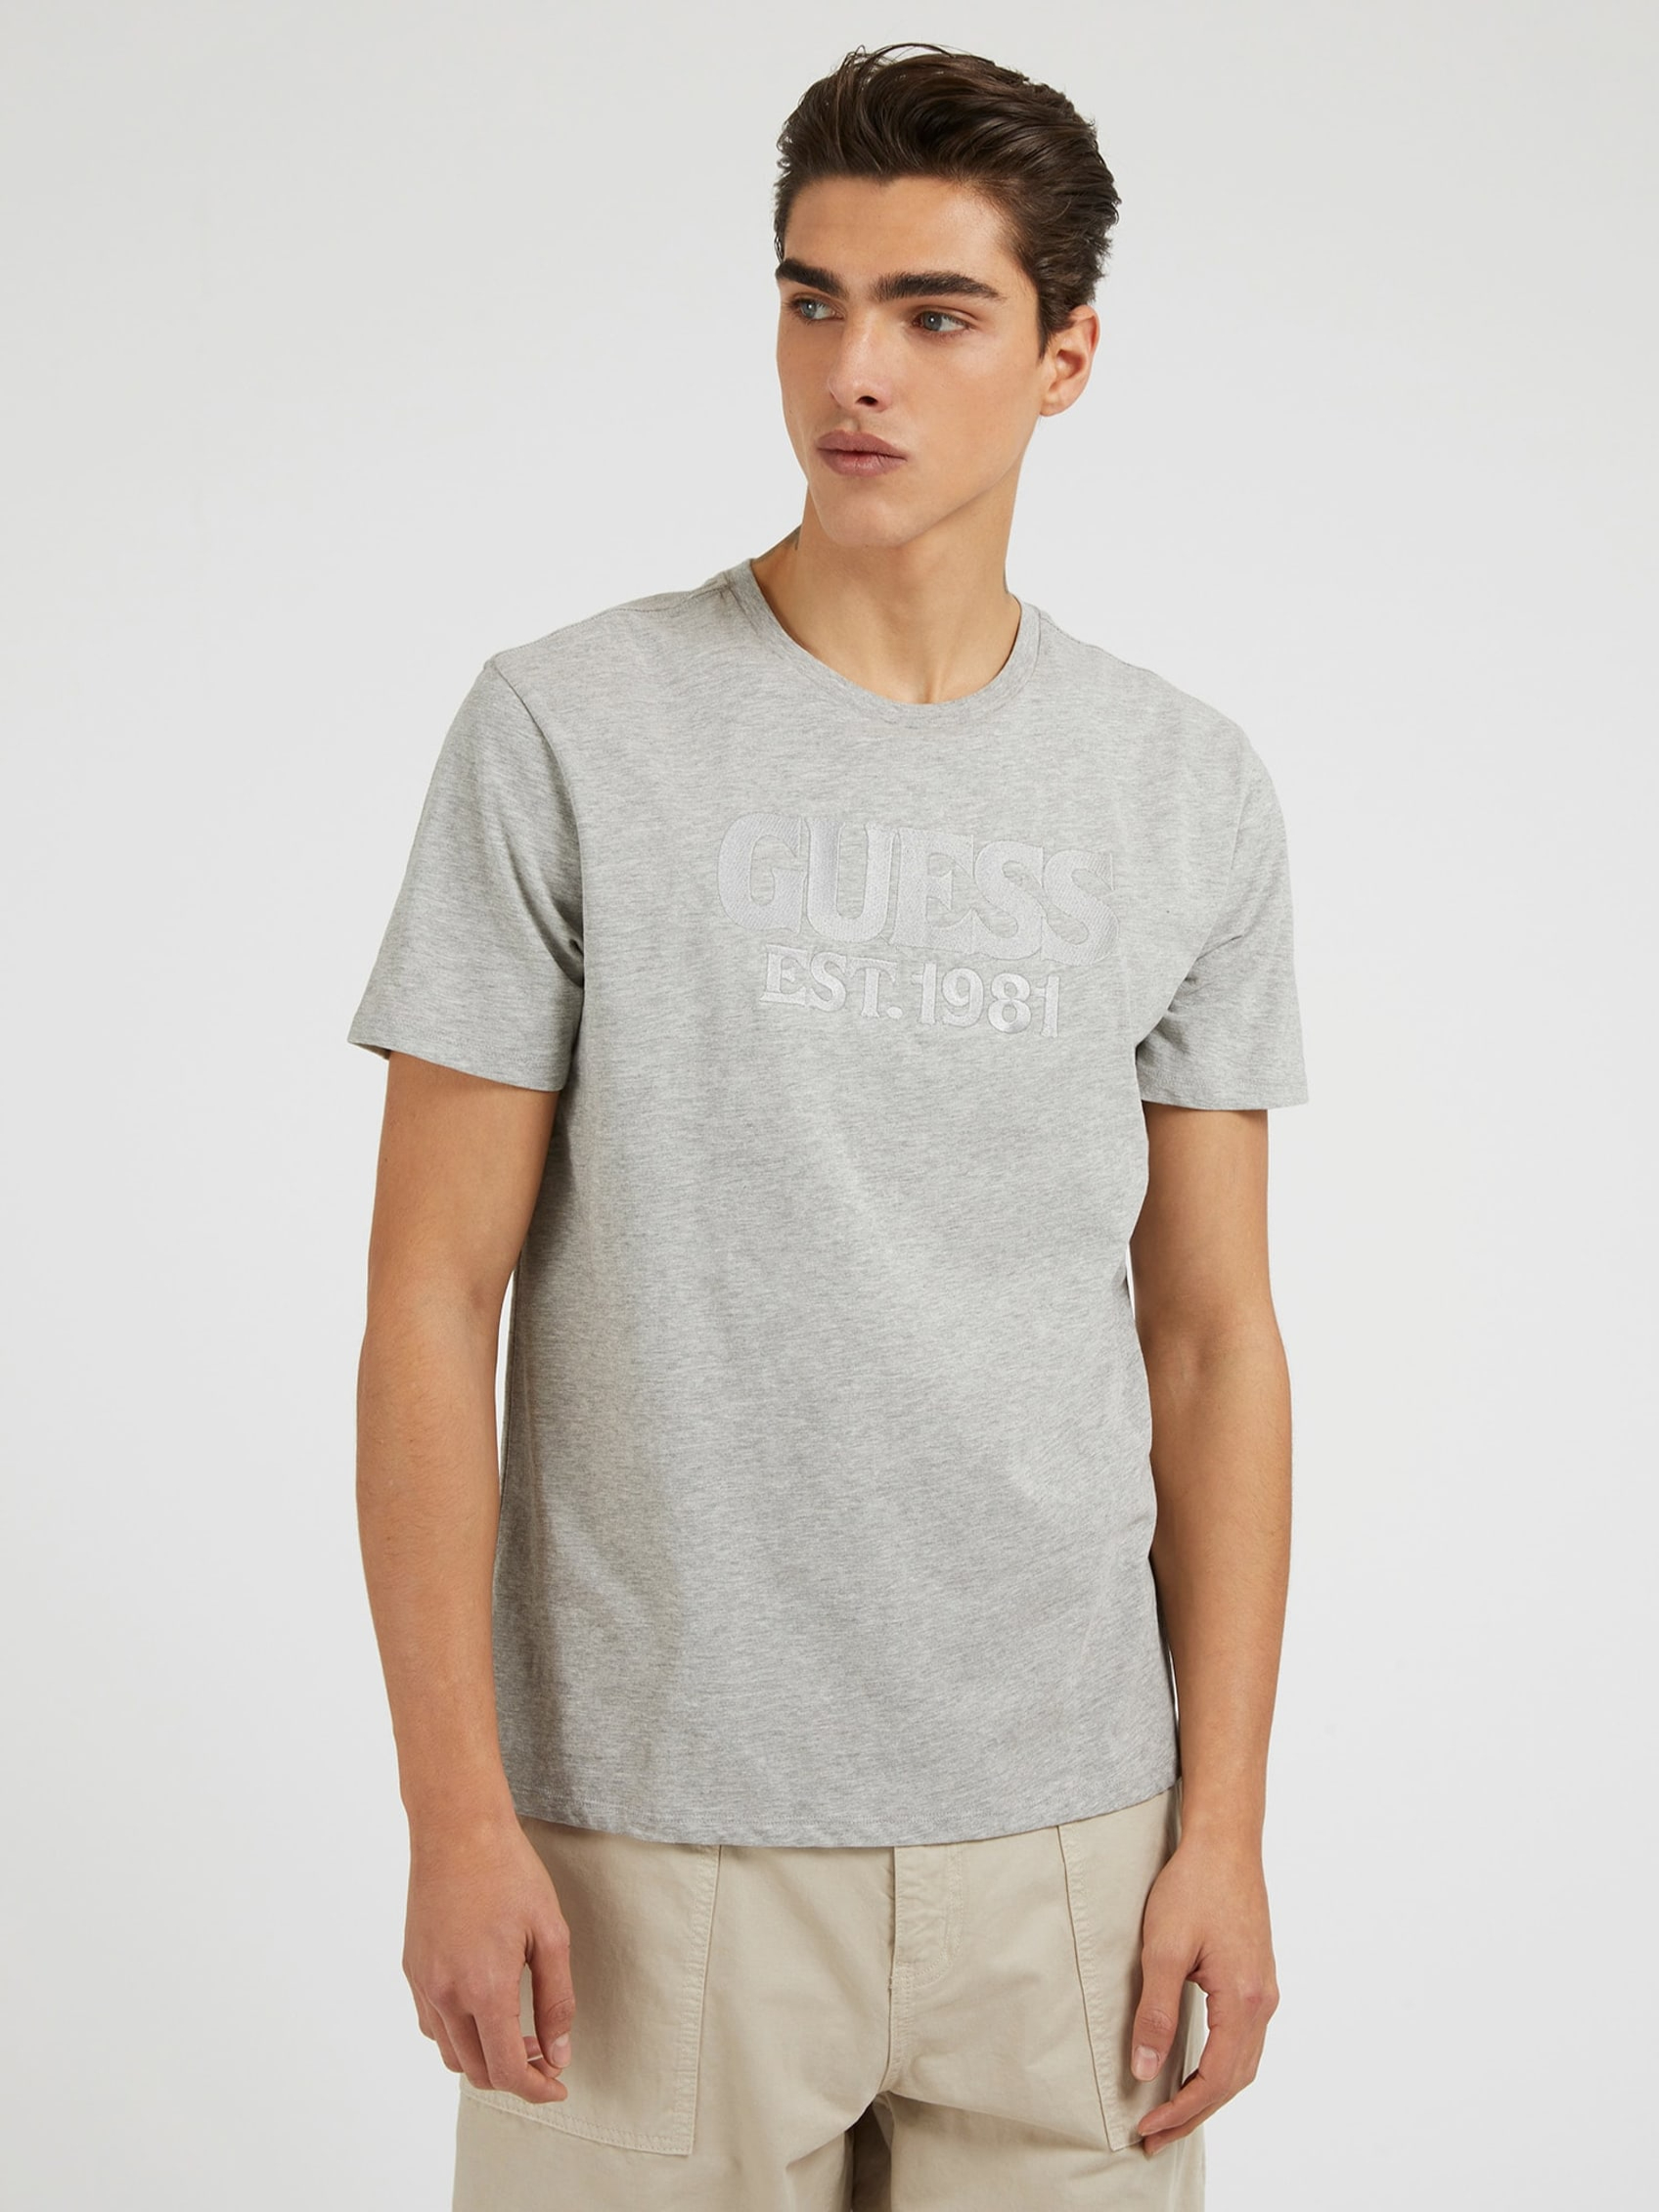 ECO BASIC EMBROIDERED GUESS TEE | Guess Philippines